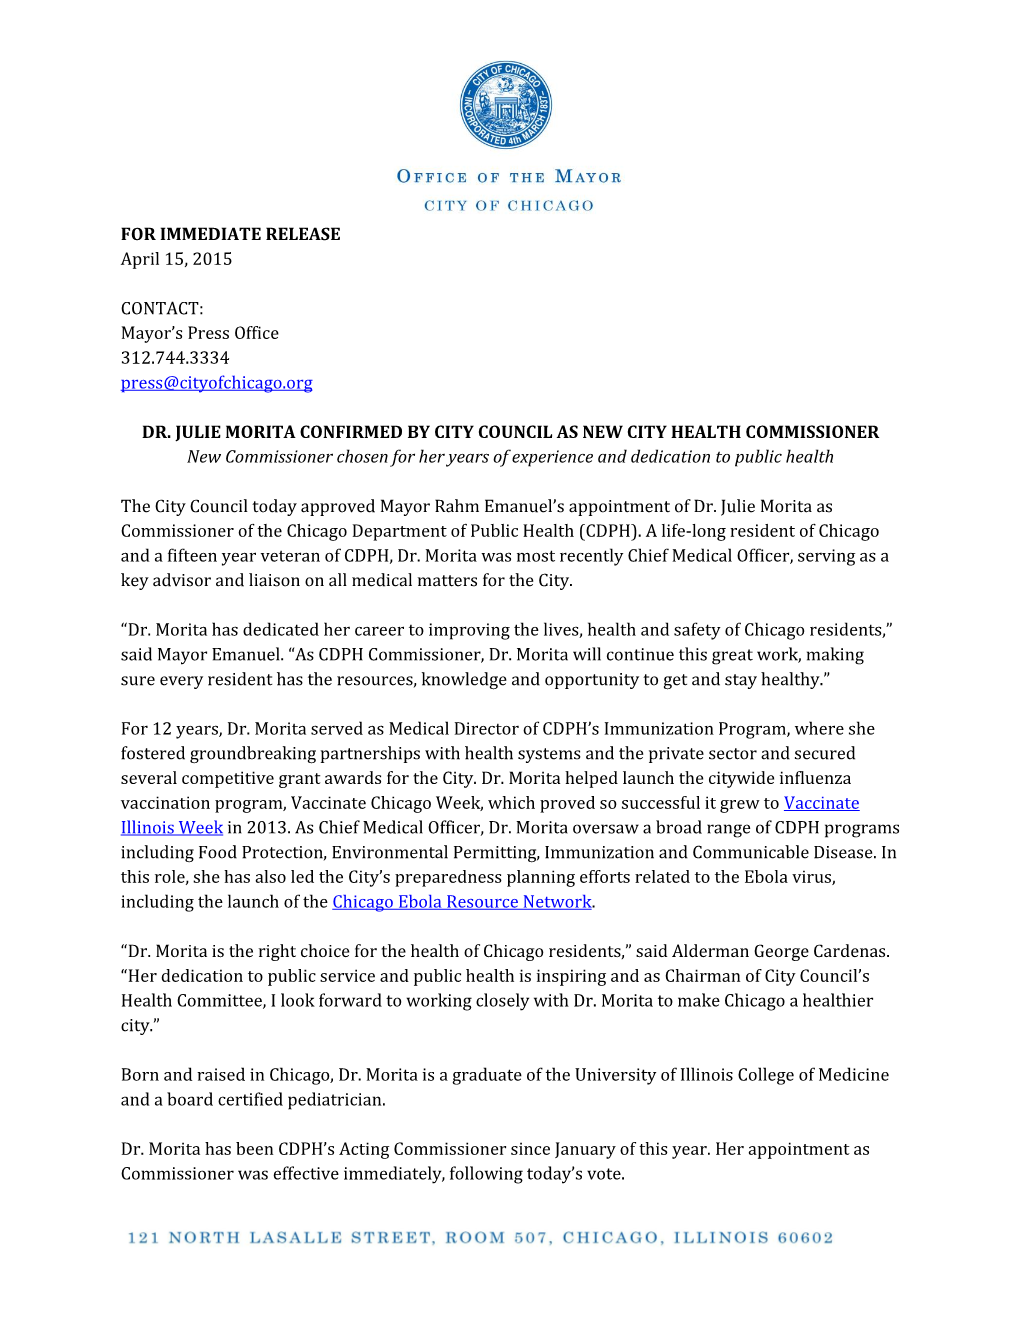 FOR IMMEDIATE RELEASE April 15, 2015 CONTACT: Mayor's Press Office 312.744.3334 Press@Cityofchicago.Org DR. JULIE MORITA CONFI